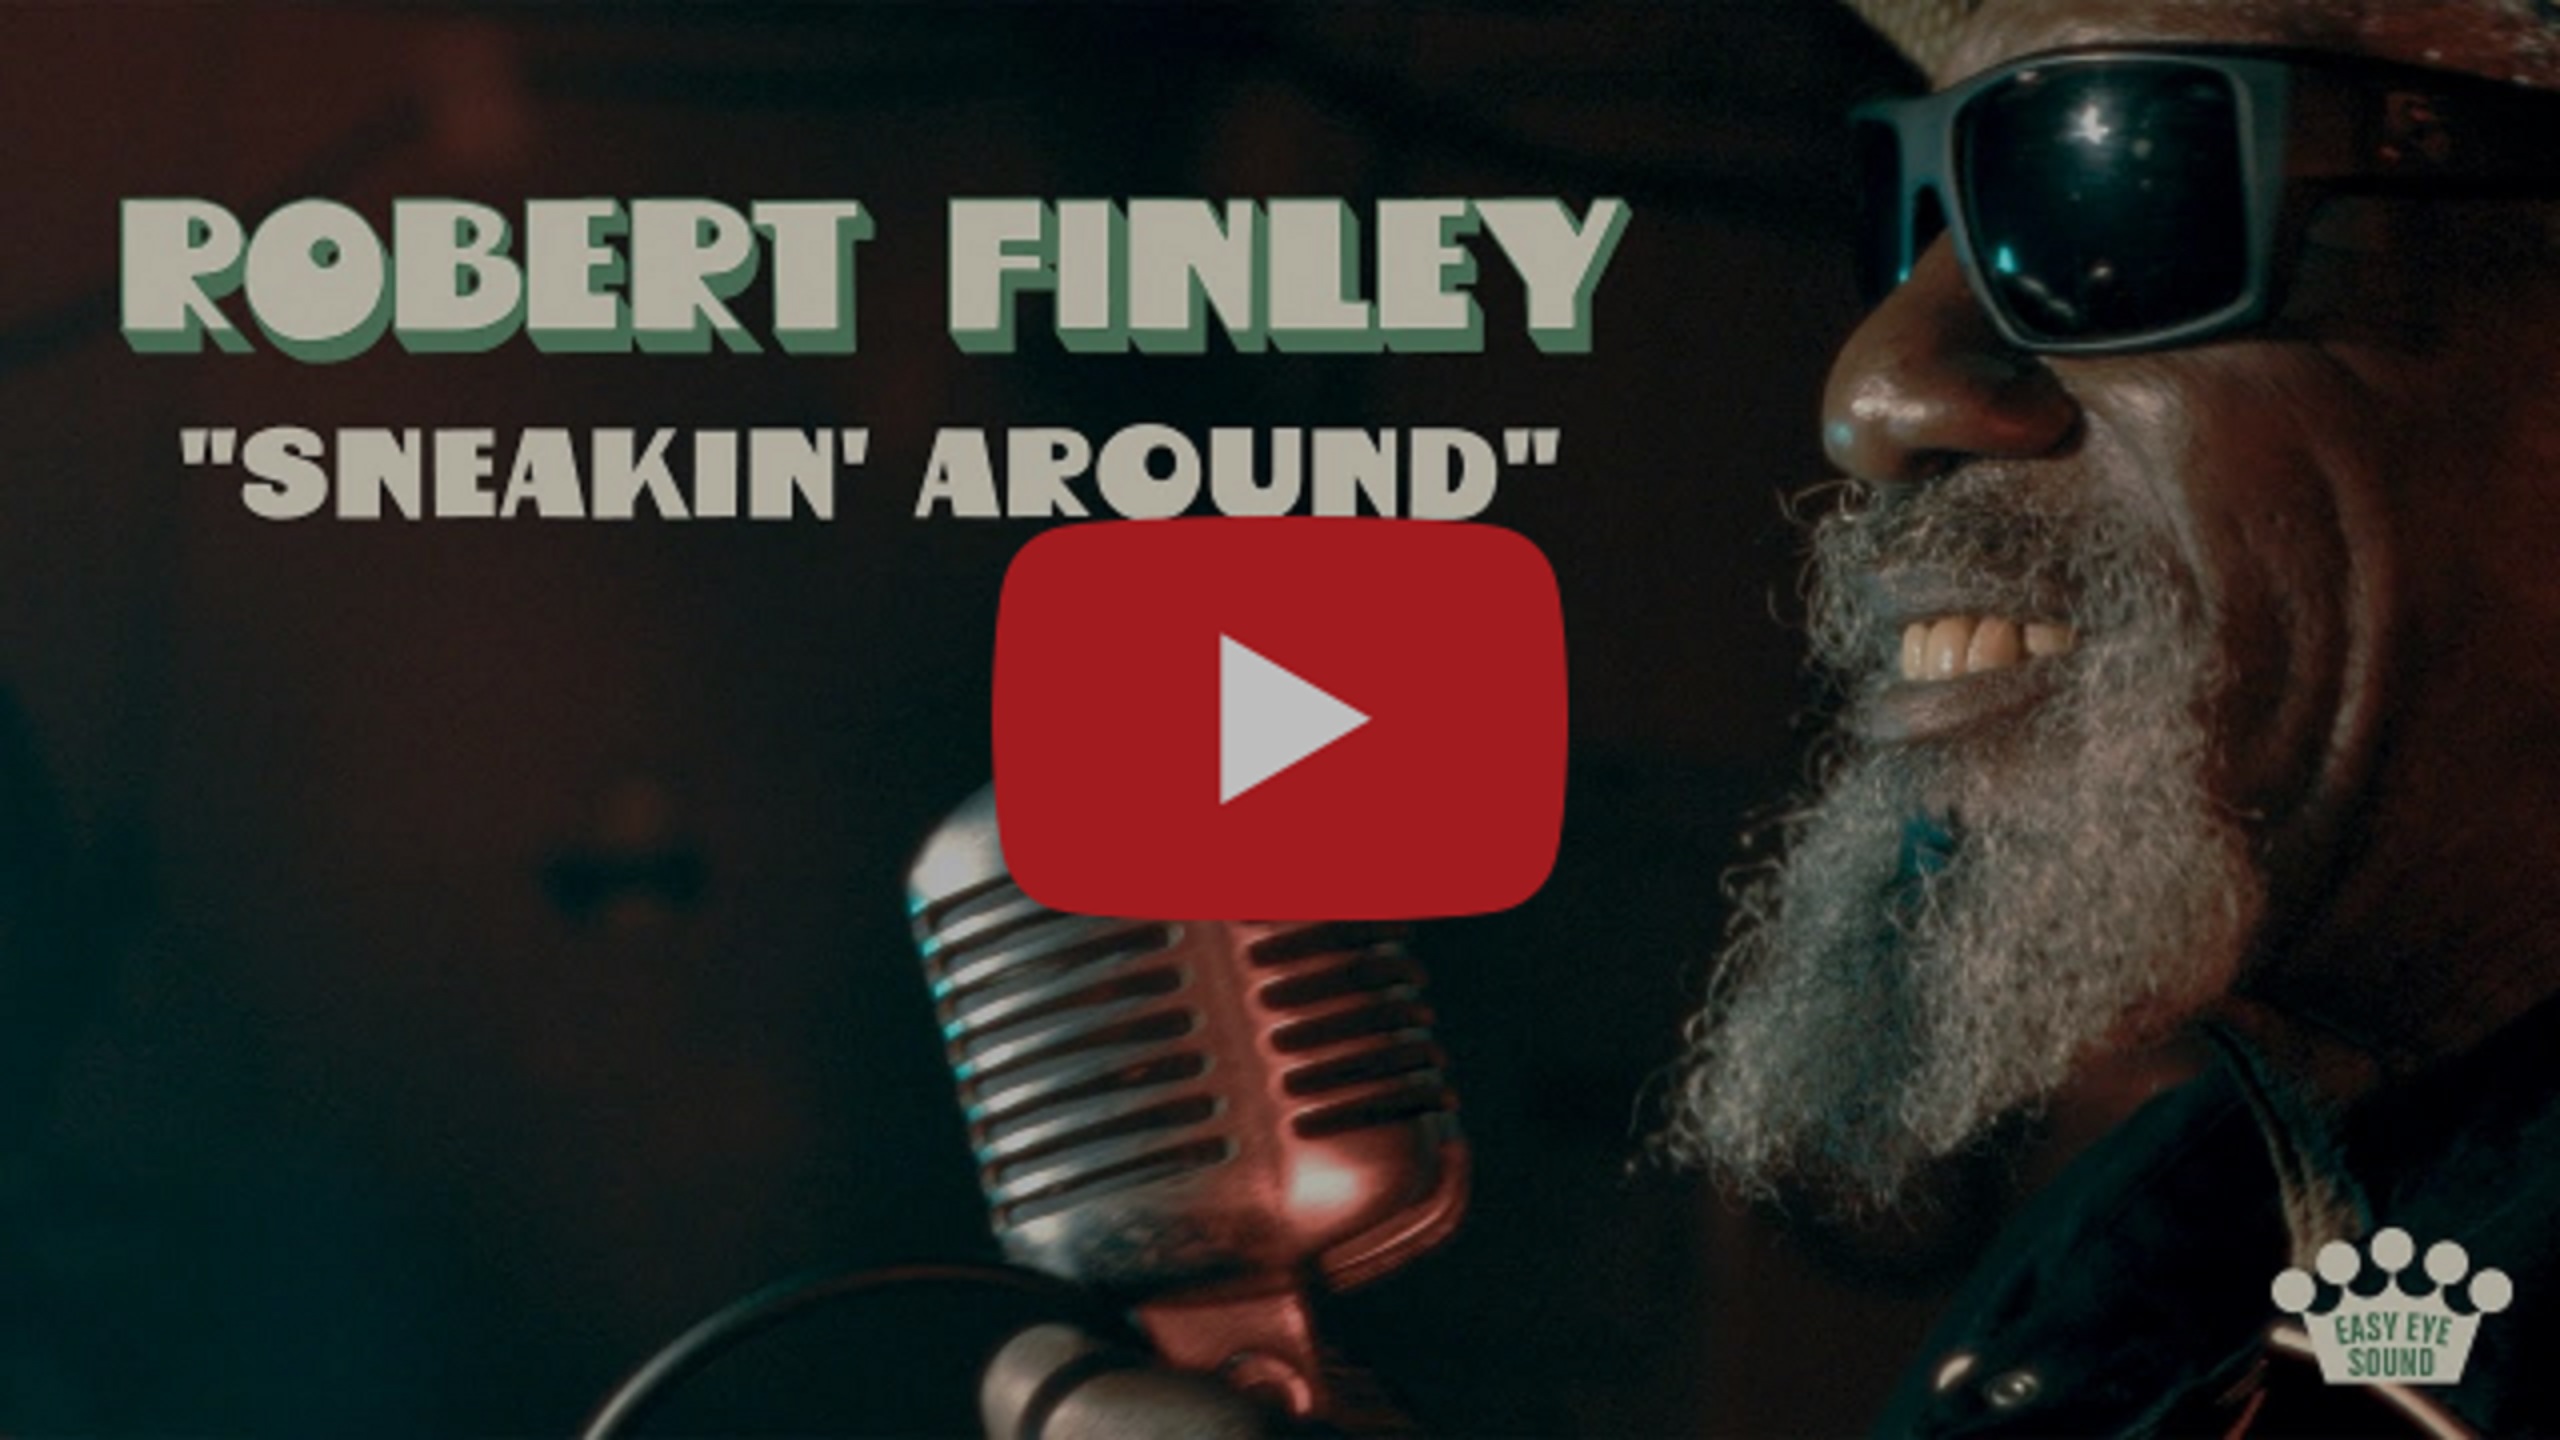 ROBERT FINLEY RELEASES “SNEAKIN’ AROUND” SOULFUL SINGLE FROM NEW ALBUM BLACK BAYOU OUT OCTOBER 27